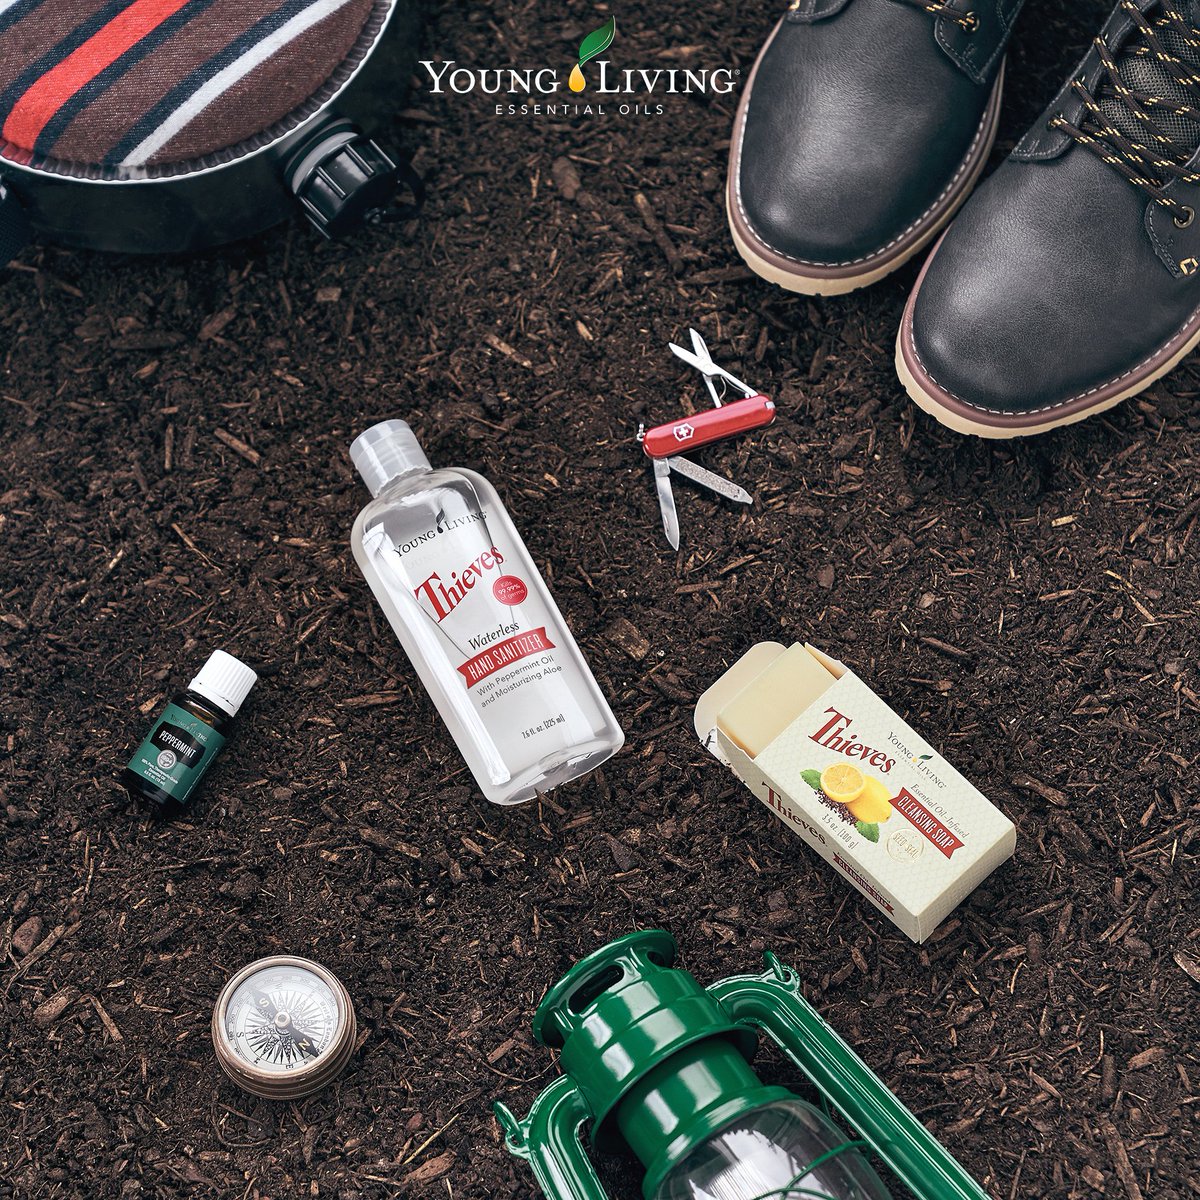 Which products are a must have for your #OutdoorAdventures? Ours include #ThievesCleansingSoap to stay clean, #ThievesHandSanitizer for right before meals, and some #Peppermint to cool down those hiking muscles. 🏕#yleo